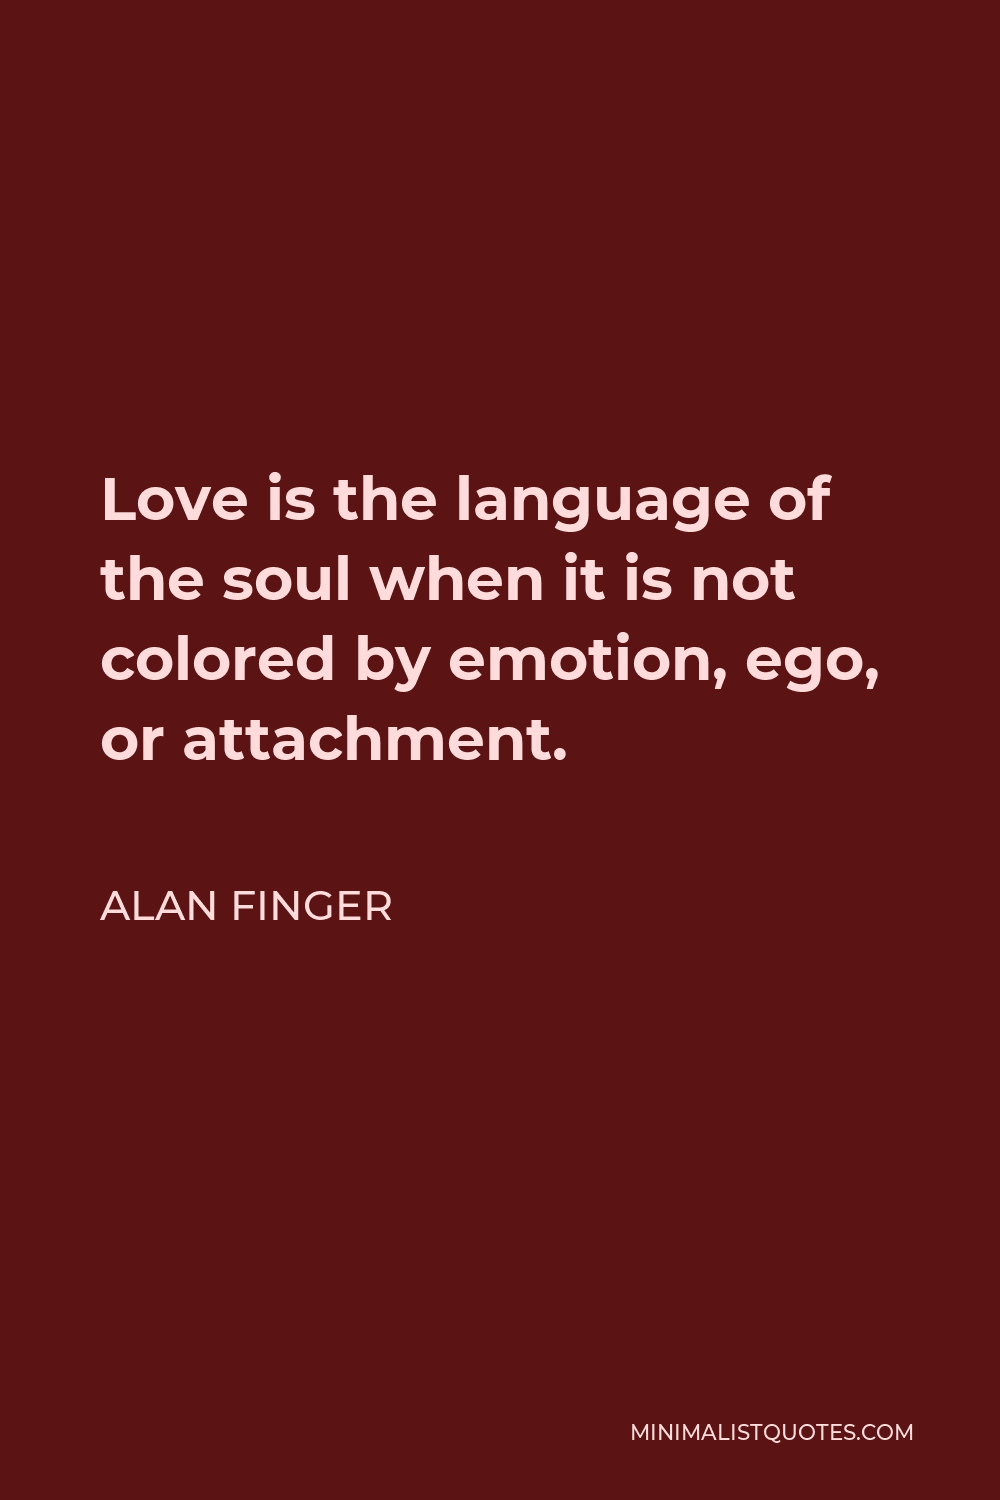 Alan Finger Quote - Love is the language of the soul when it is not colored by emotion, ego, or attachment.